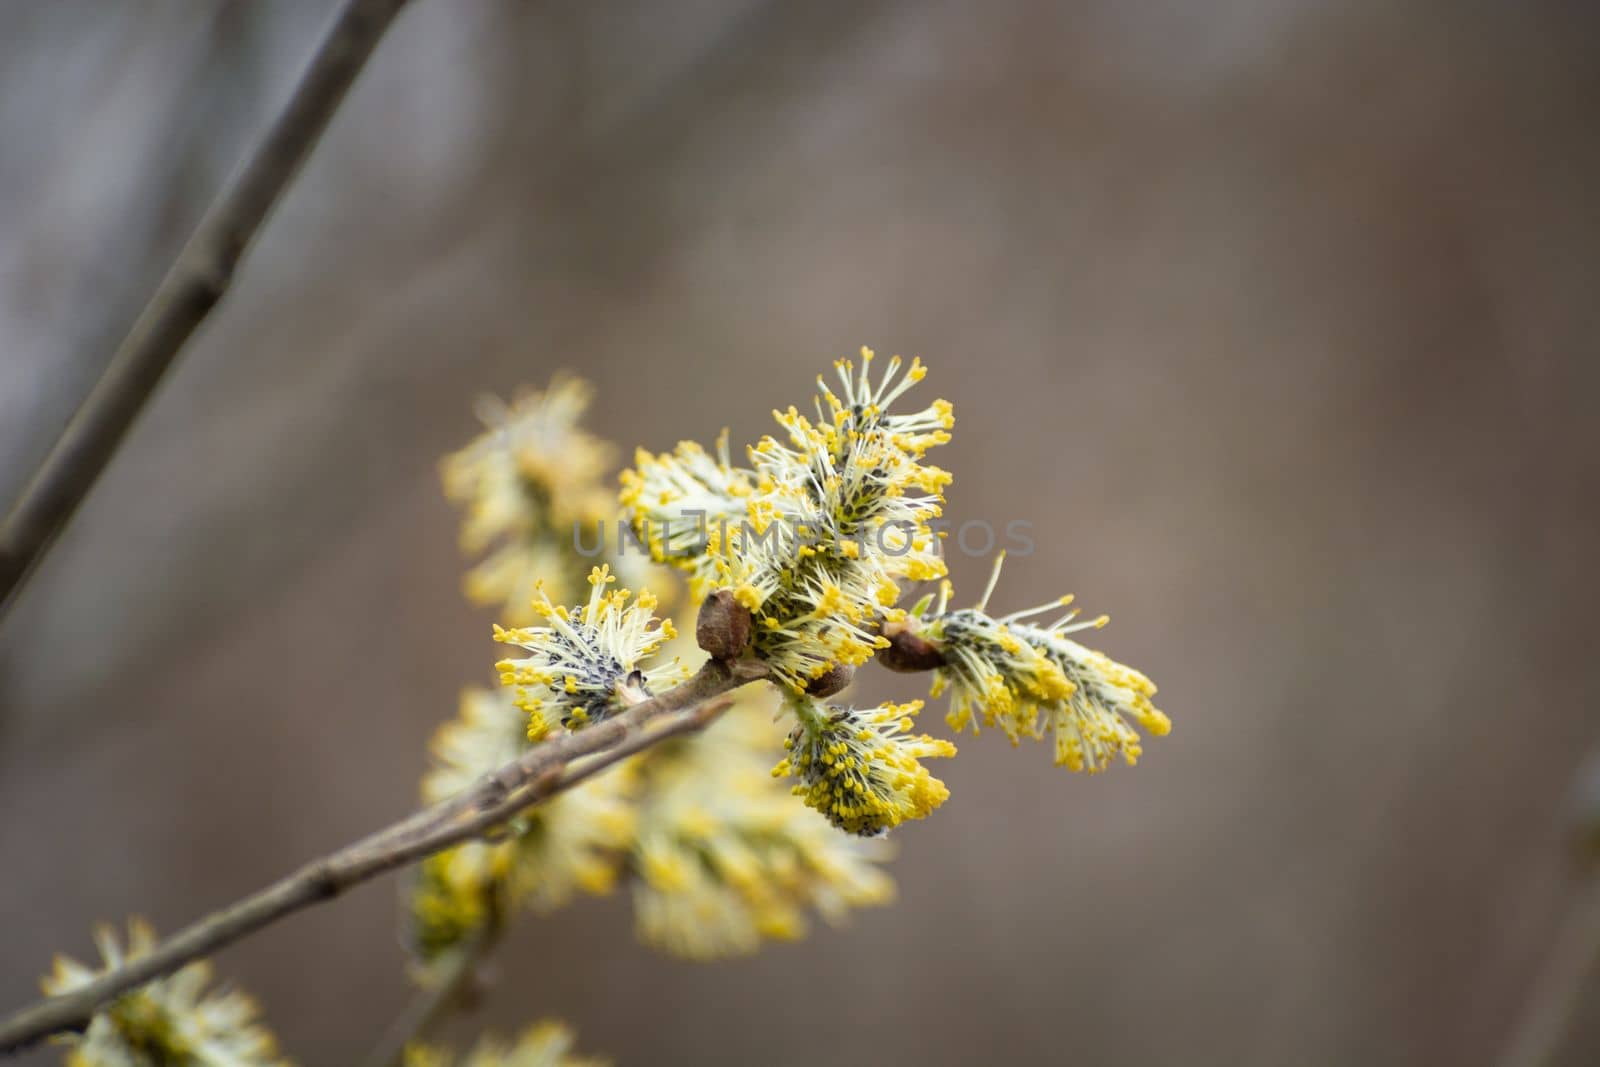 Twig with yellow catkins, herald of spring, April day